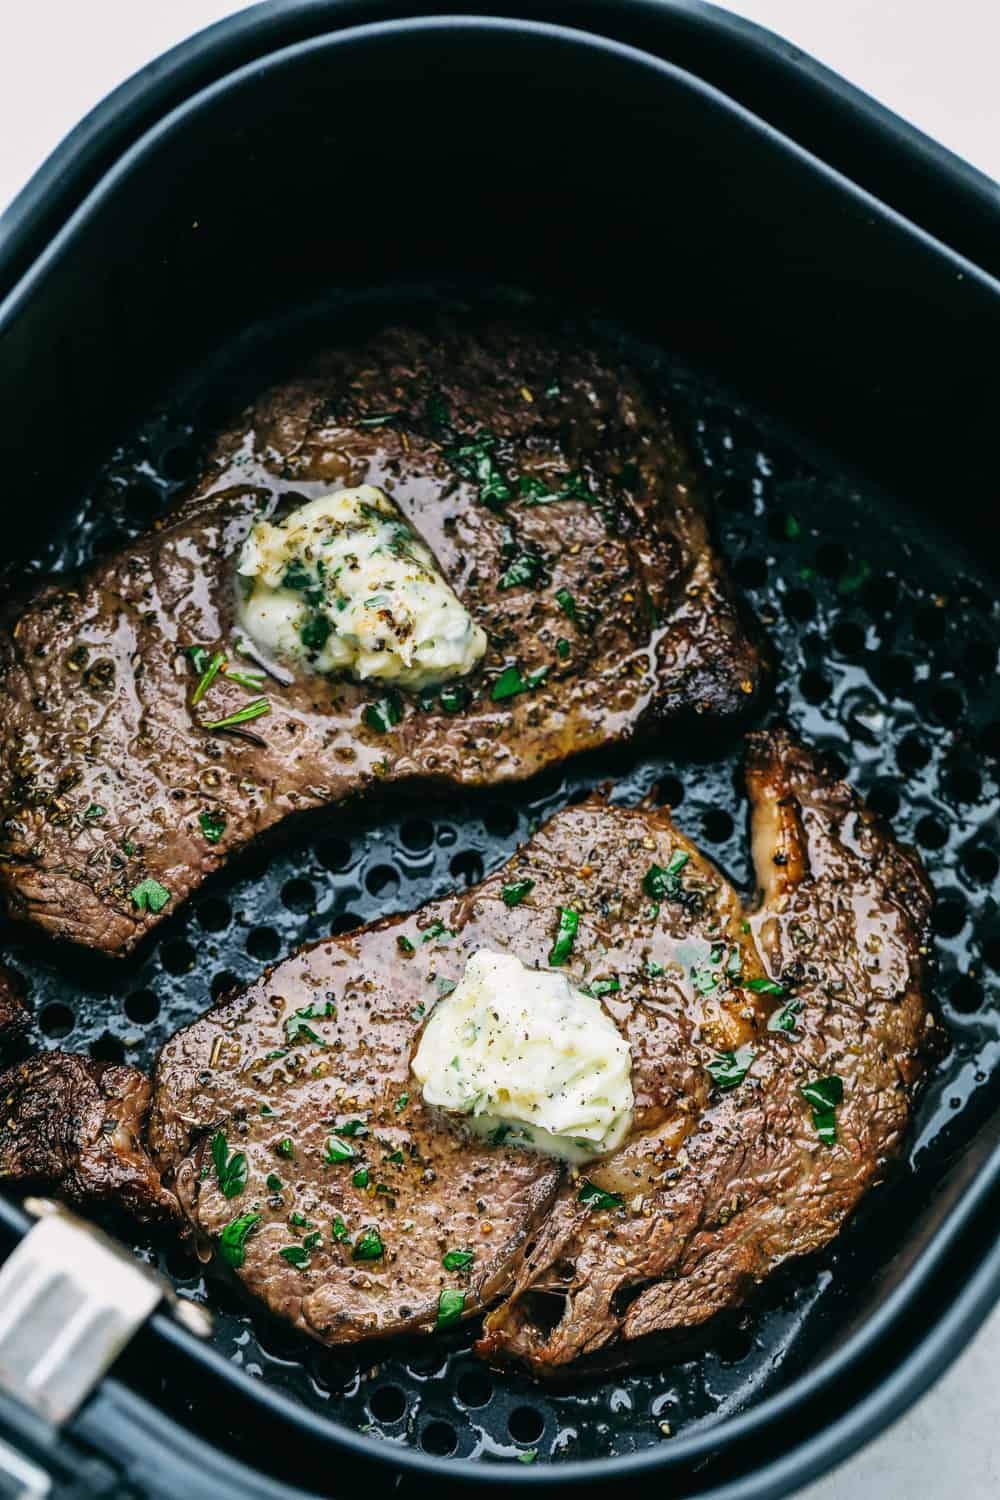 Perfect Air Fryer Steak With Garlic Herb Butter | The Recipe Critic